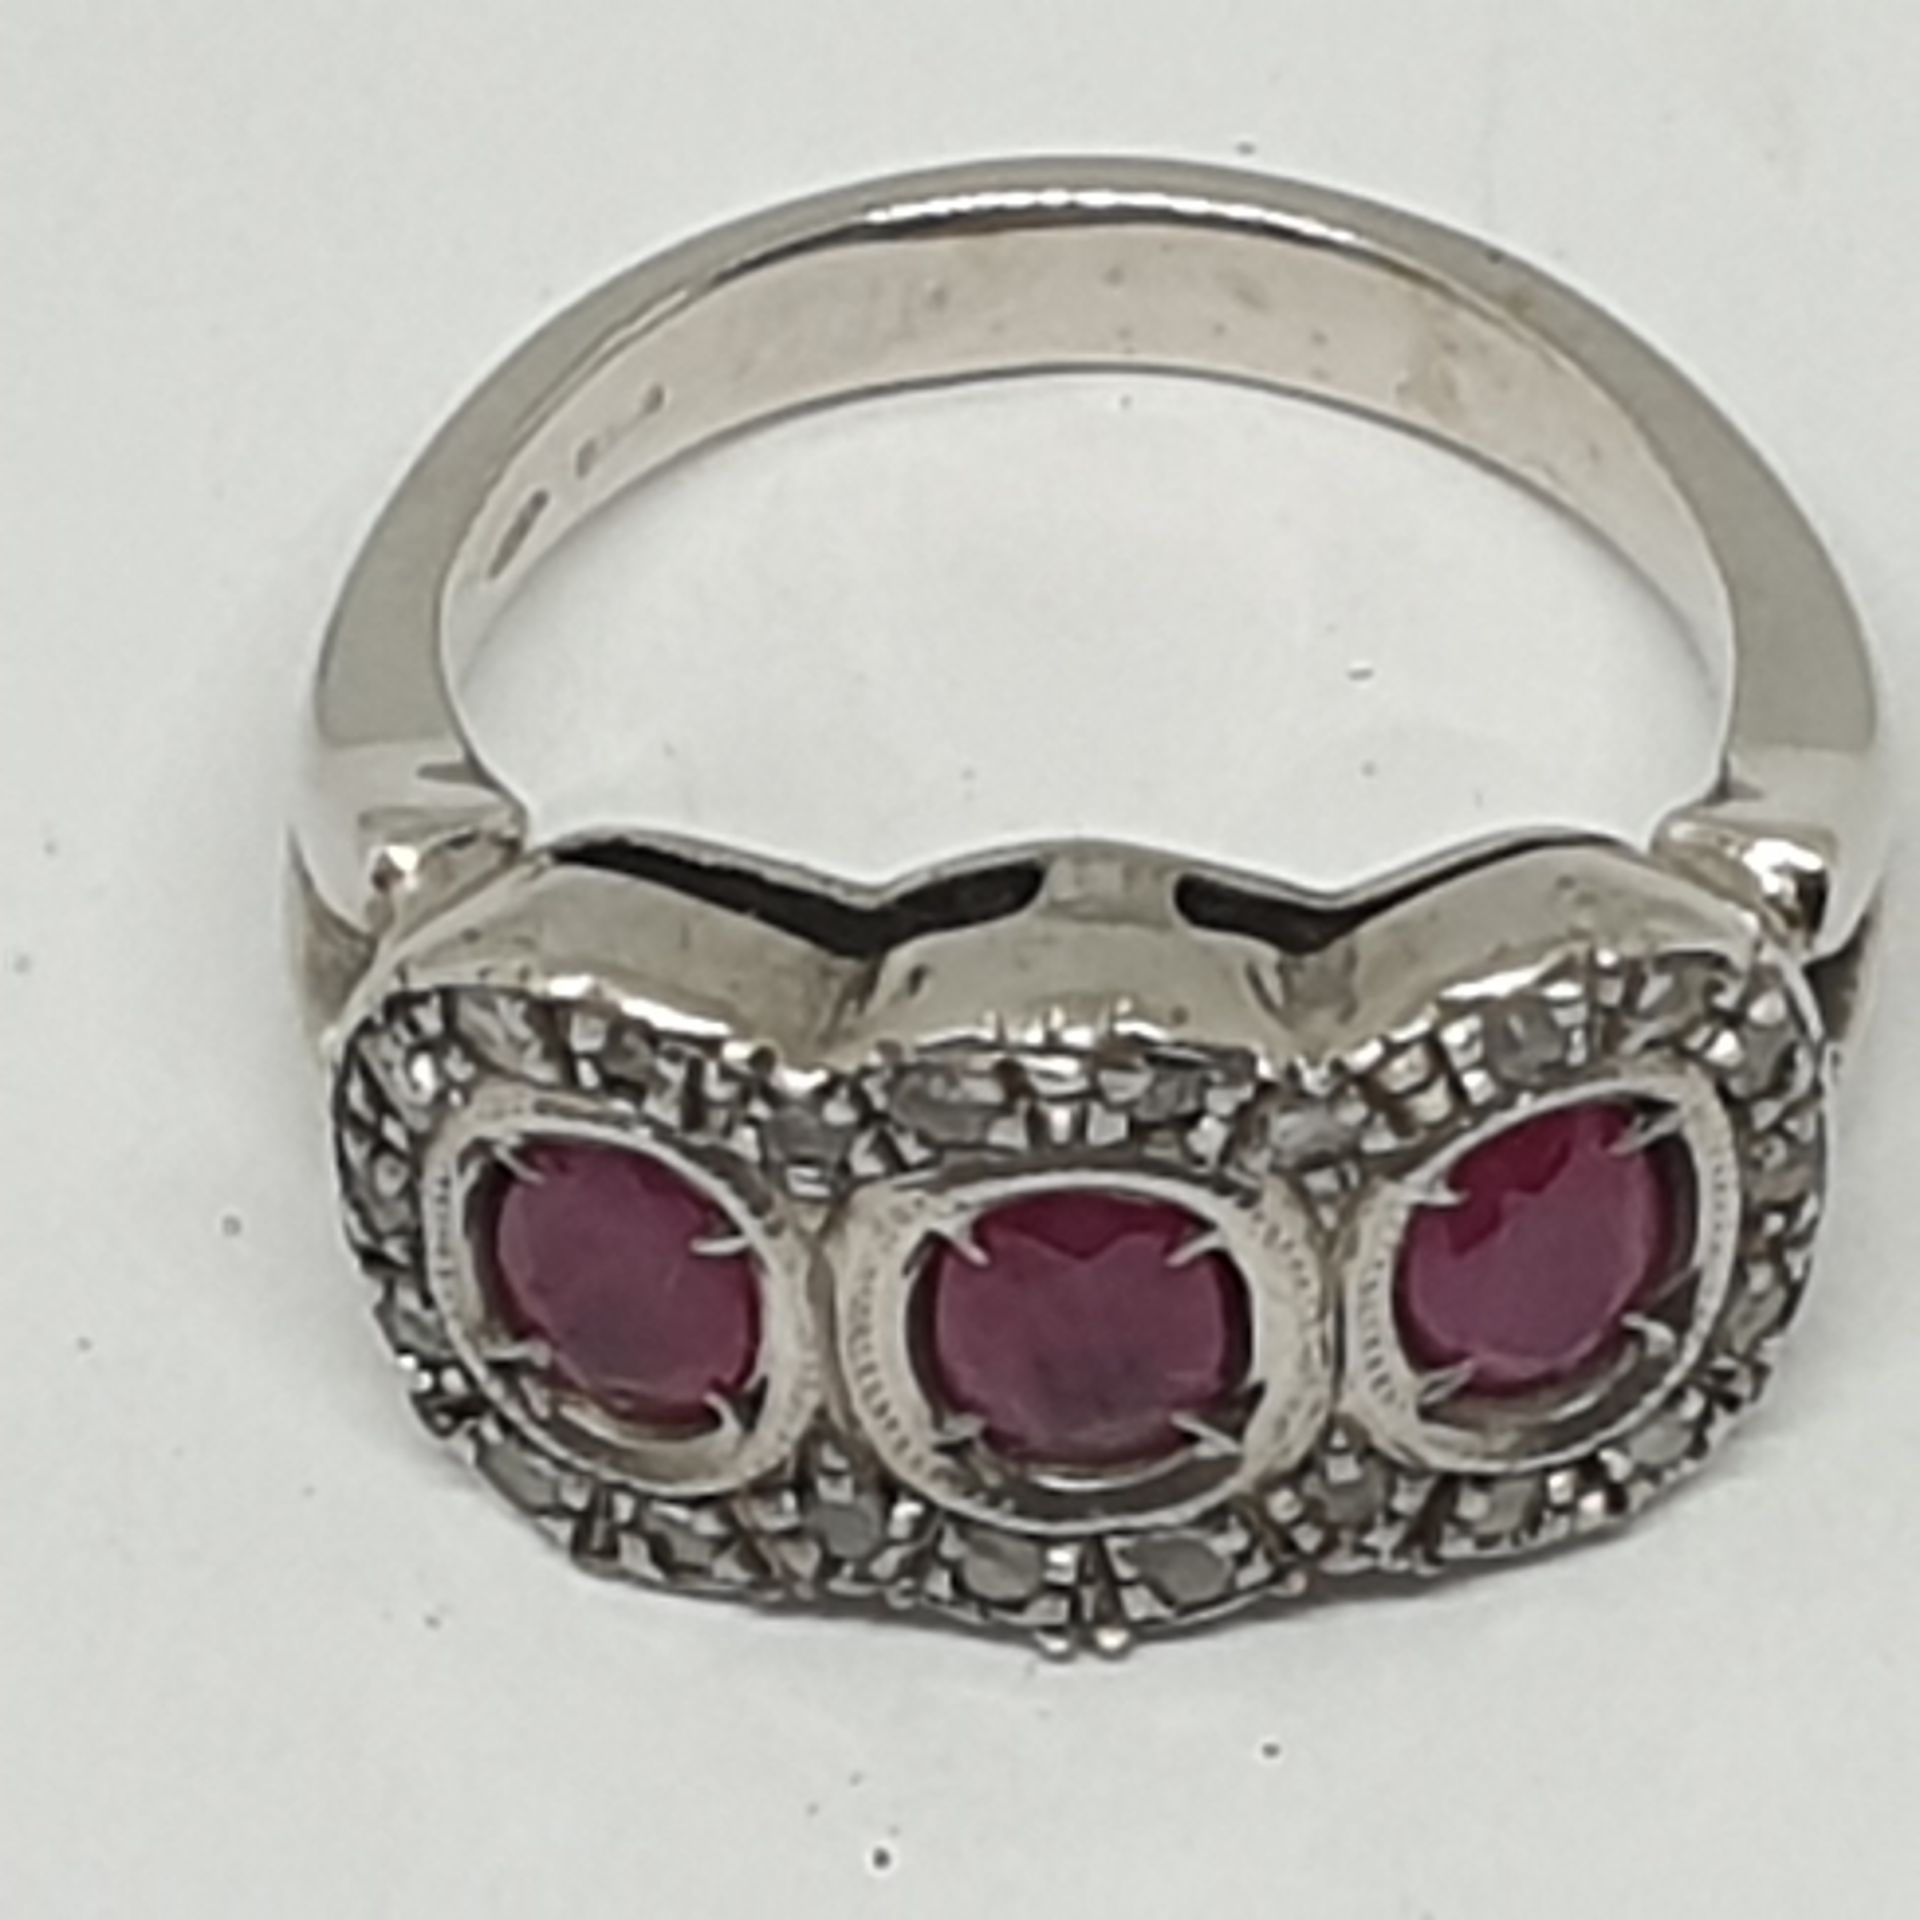 18 K GOLD RING 9.8 WITH 4 CENTRAL OVAL RUBIES FROM APPROXIMATELY 1.12 TOTAL CTS AND ROSETTE - Image 4 of 4